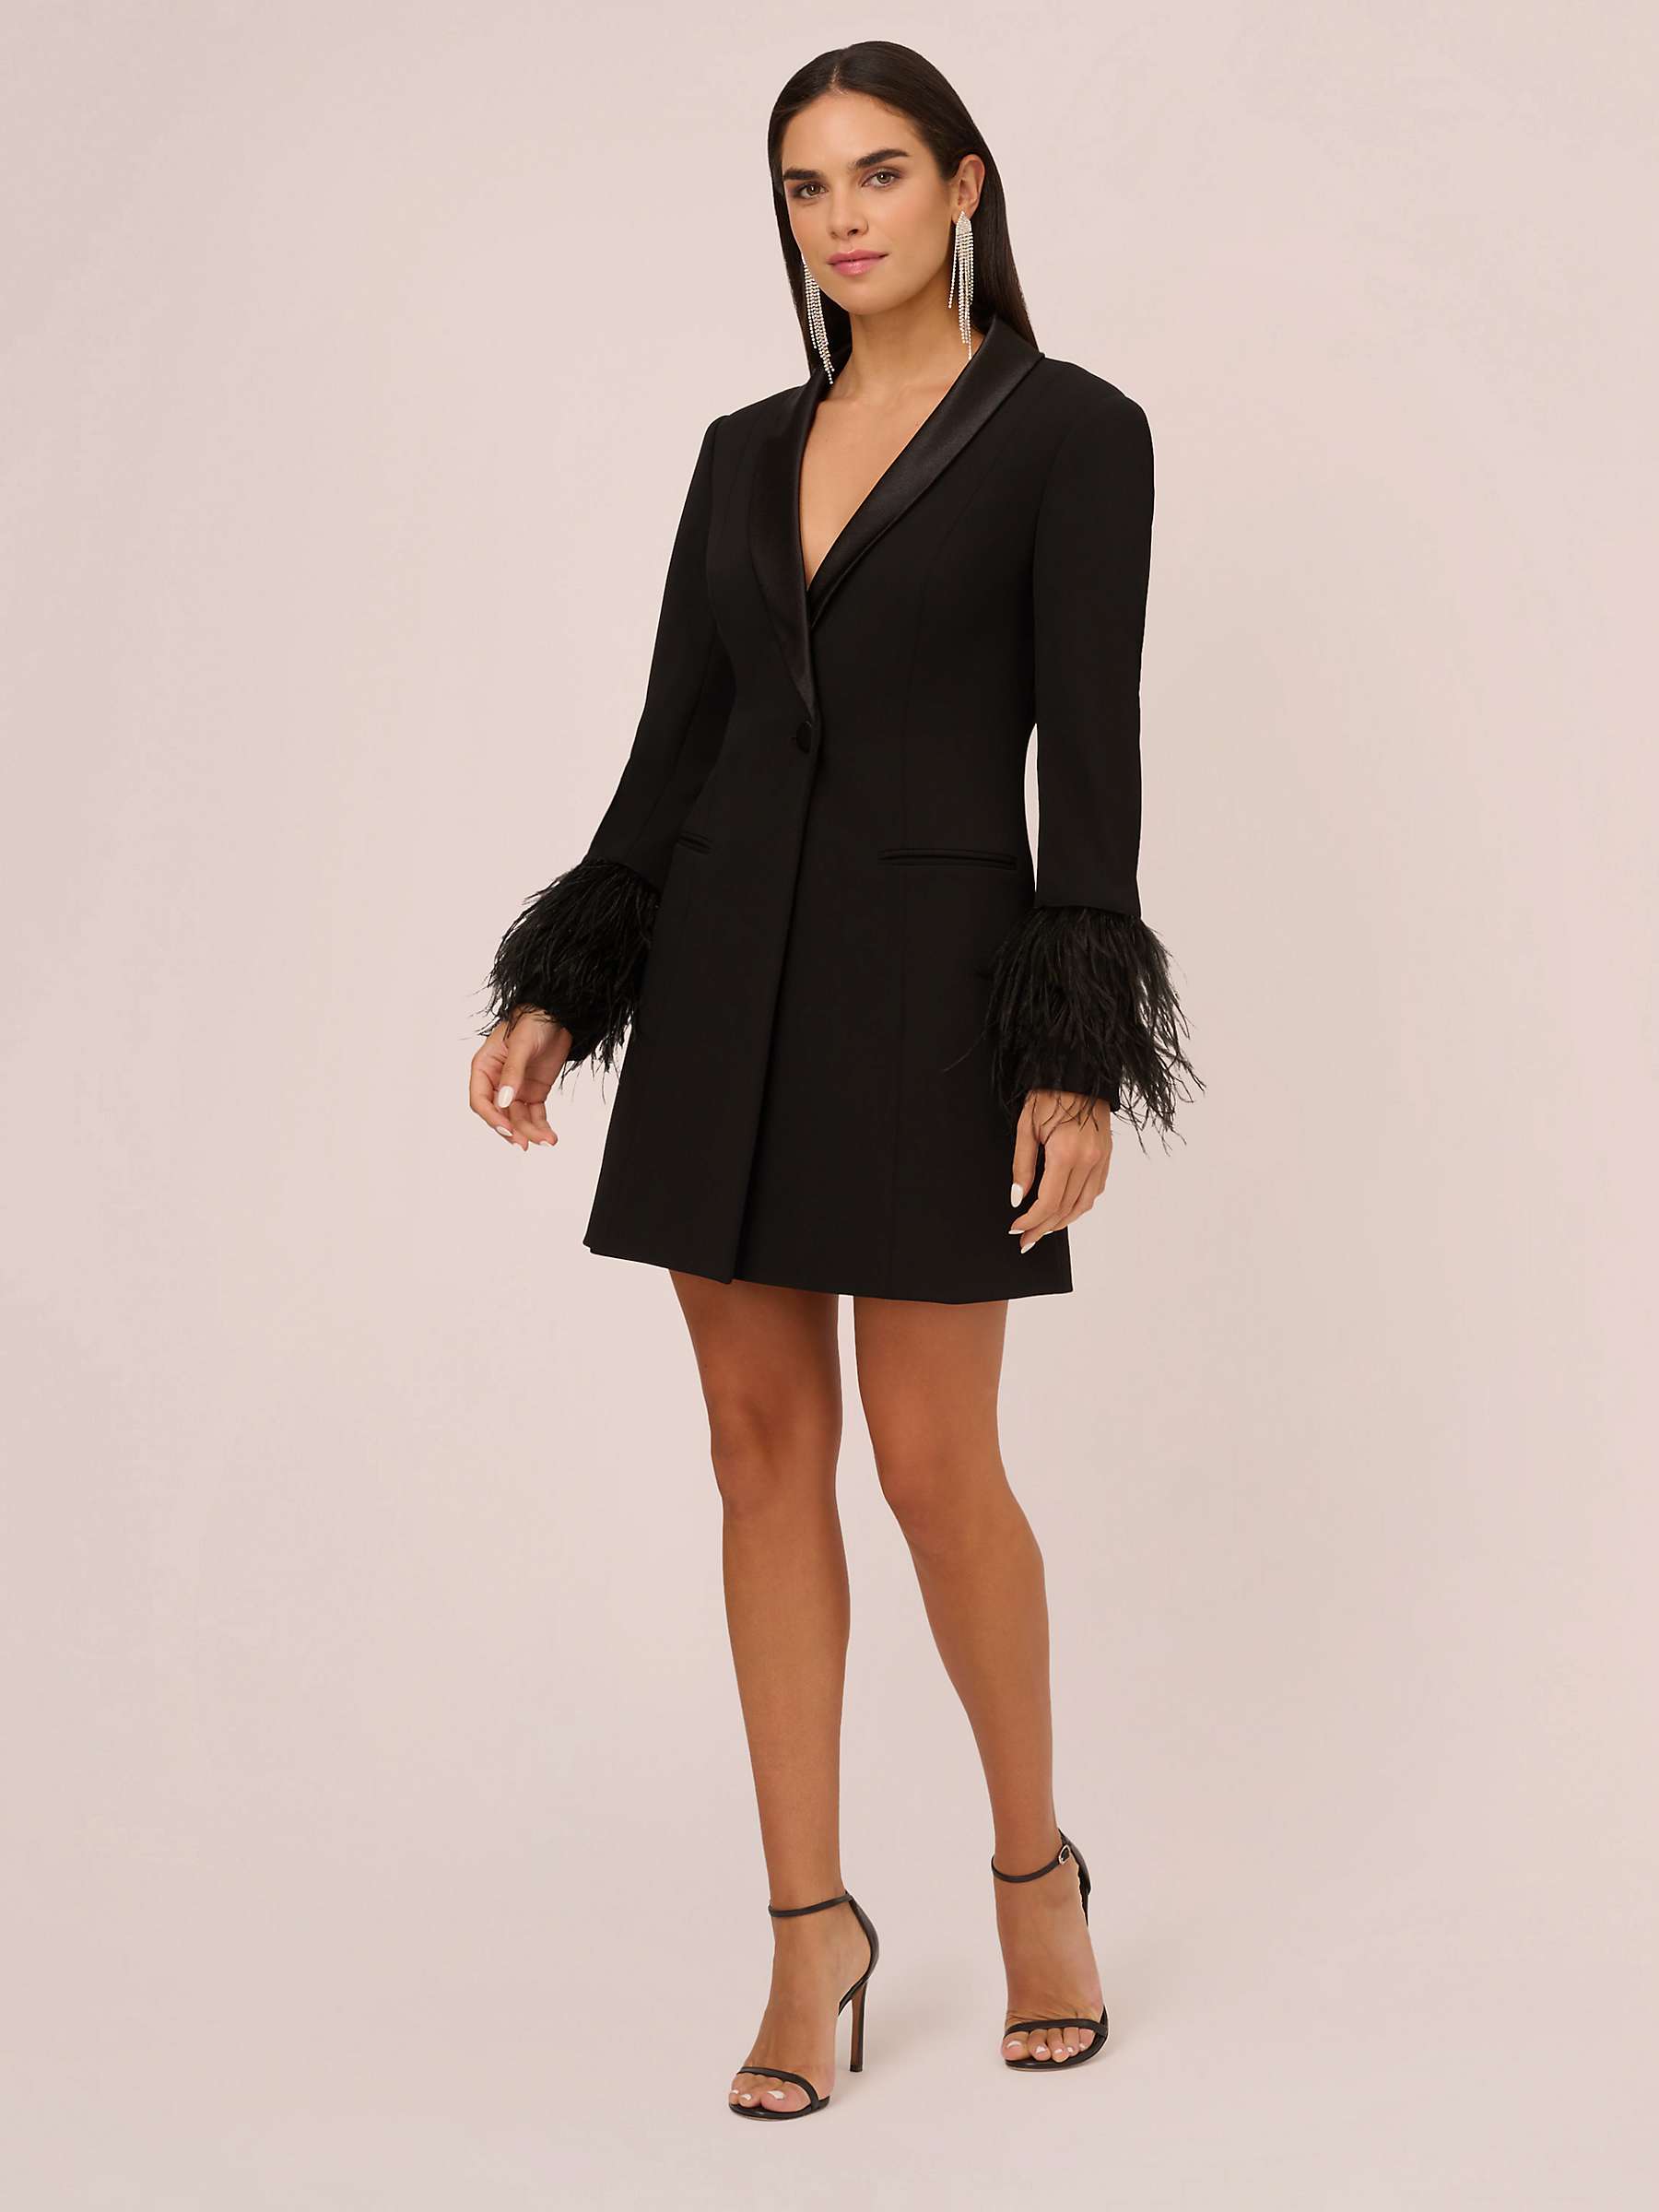 Buy Aidan by Adrianna Papell Crepe Feather Cuff Blazer Dress, Black Online at johnlewis.com